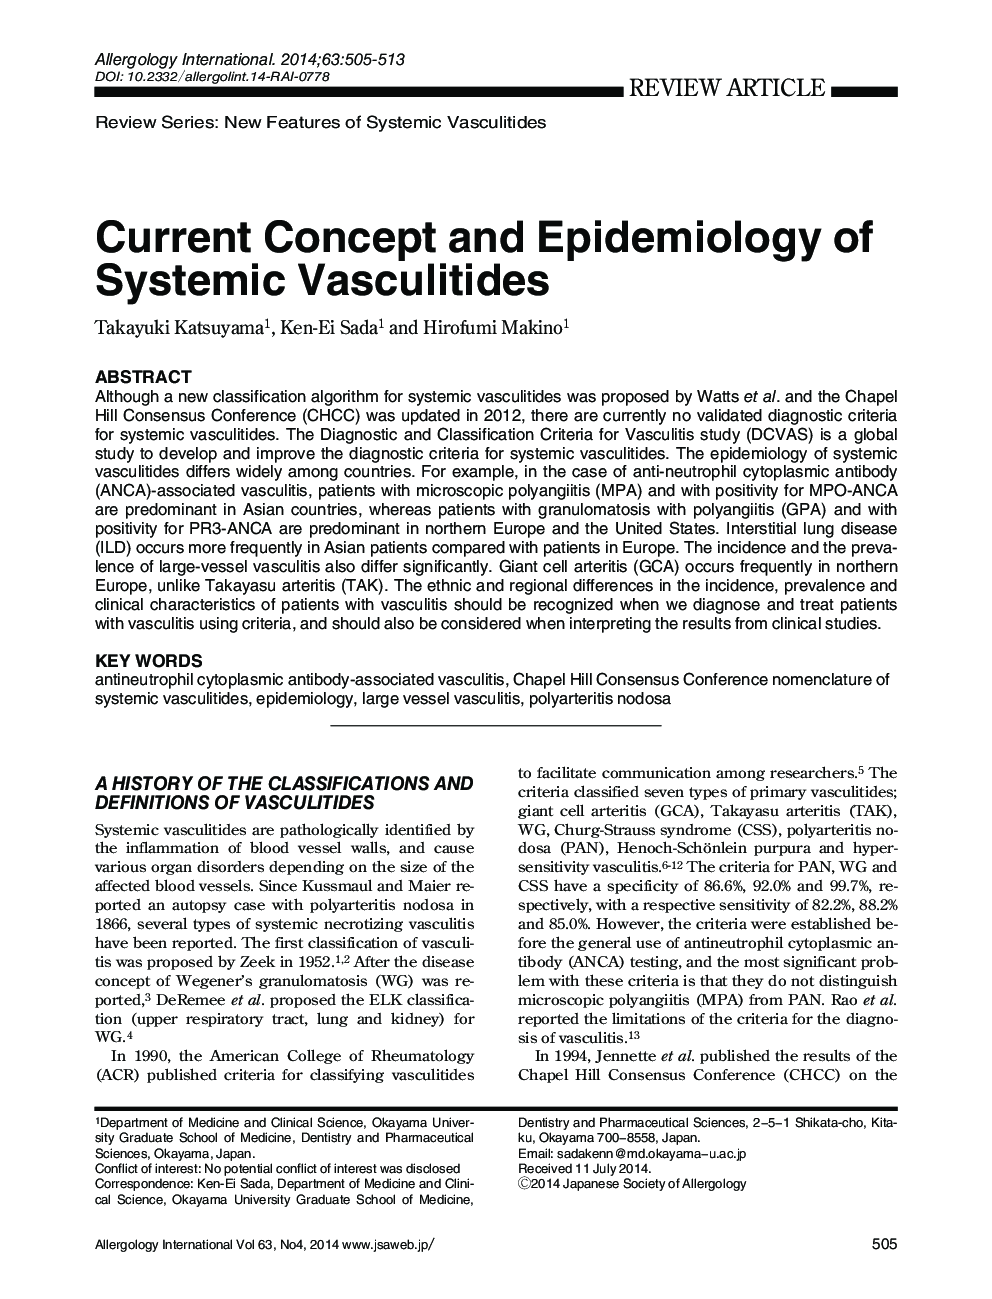 Current Concept and Epidemiology of Systemic Vasculitides 